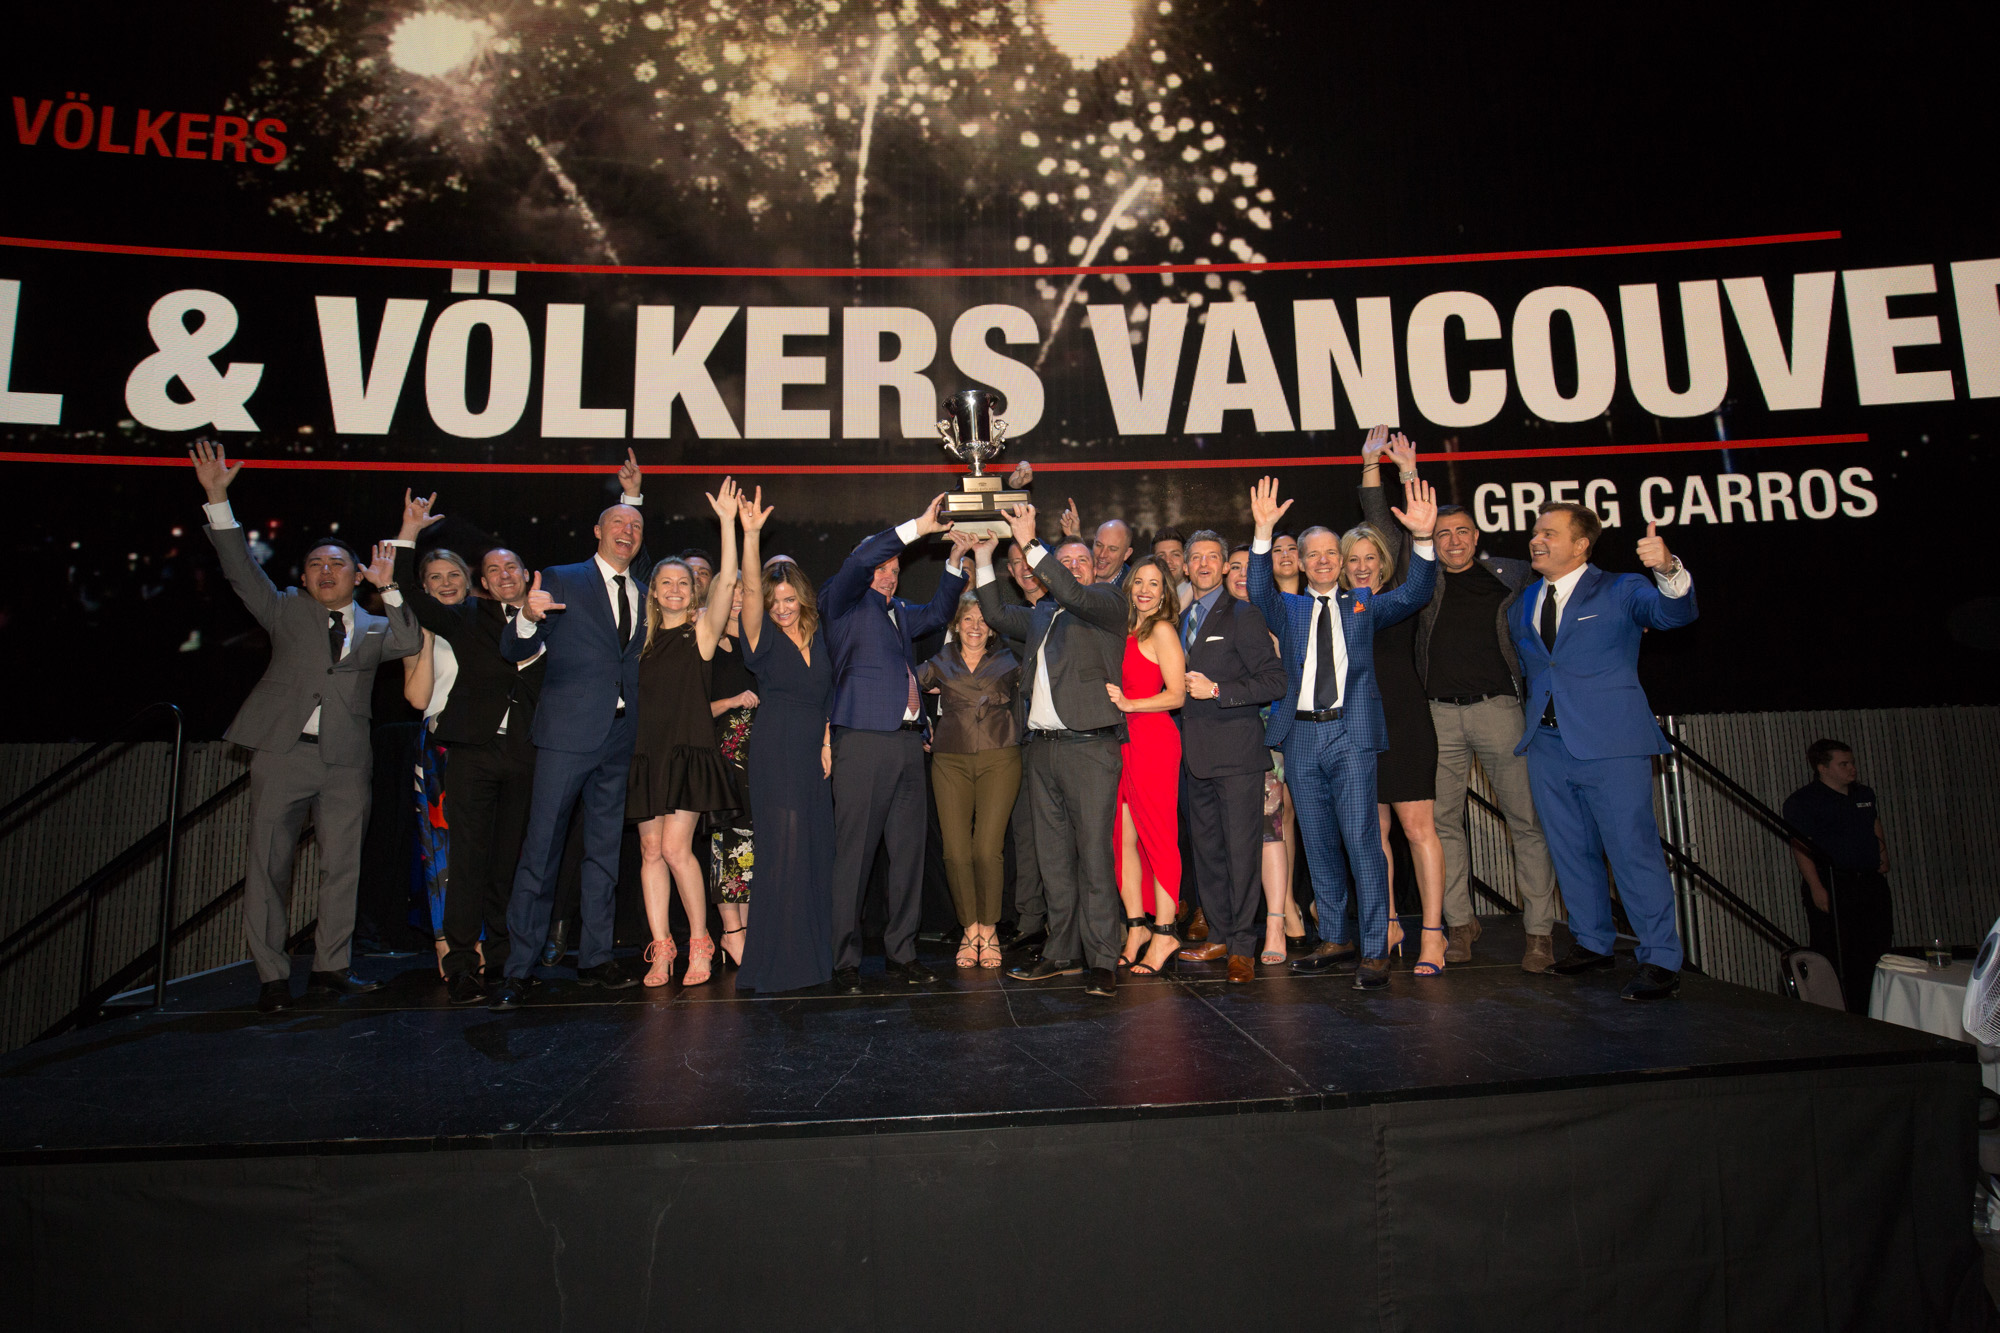 Engel & Völkers Vancouver was awarded this year's Engel & Völkers Cup, the brand's highest honor, during its Awards Gala at Seattle's Museum of Pop Culture.